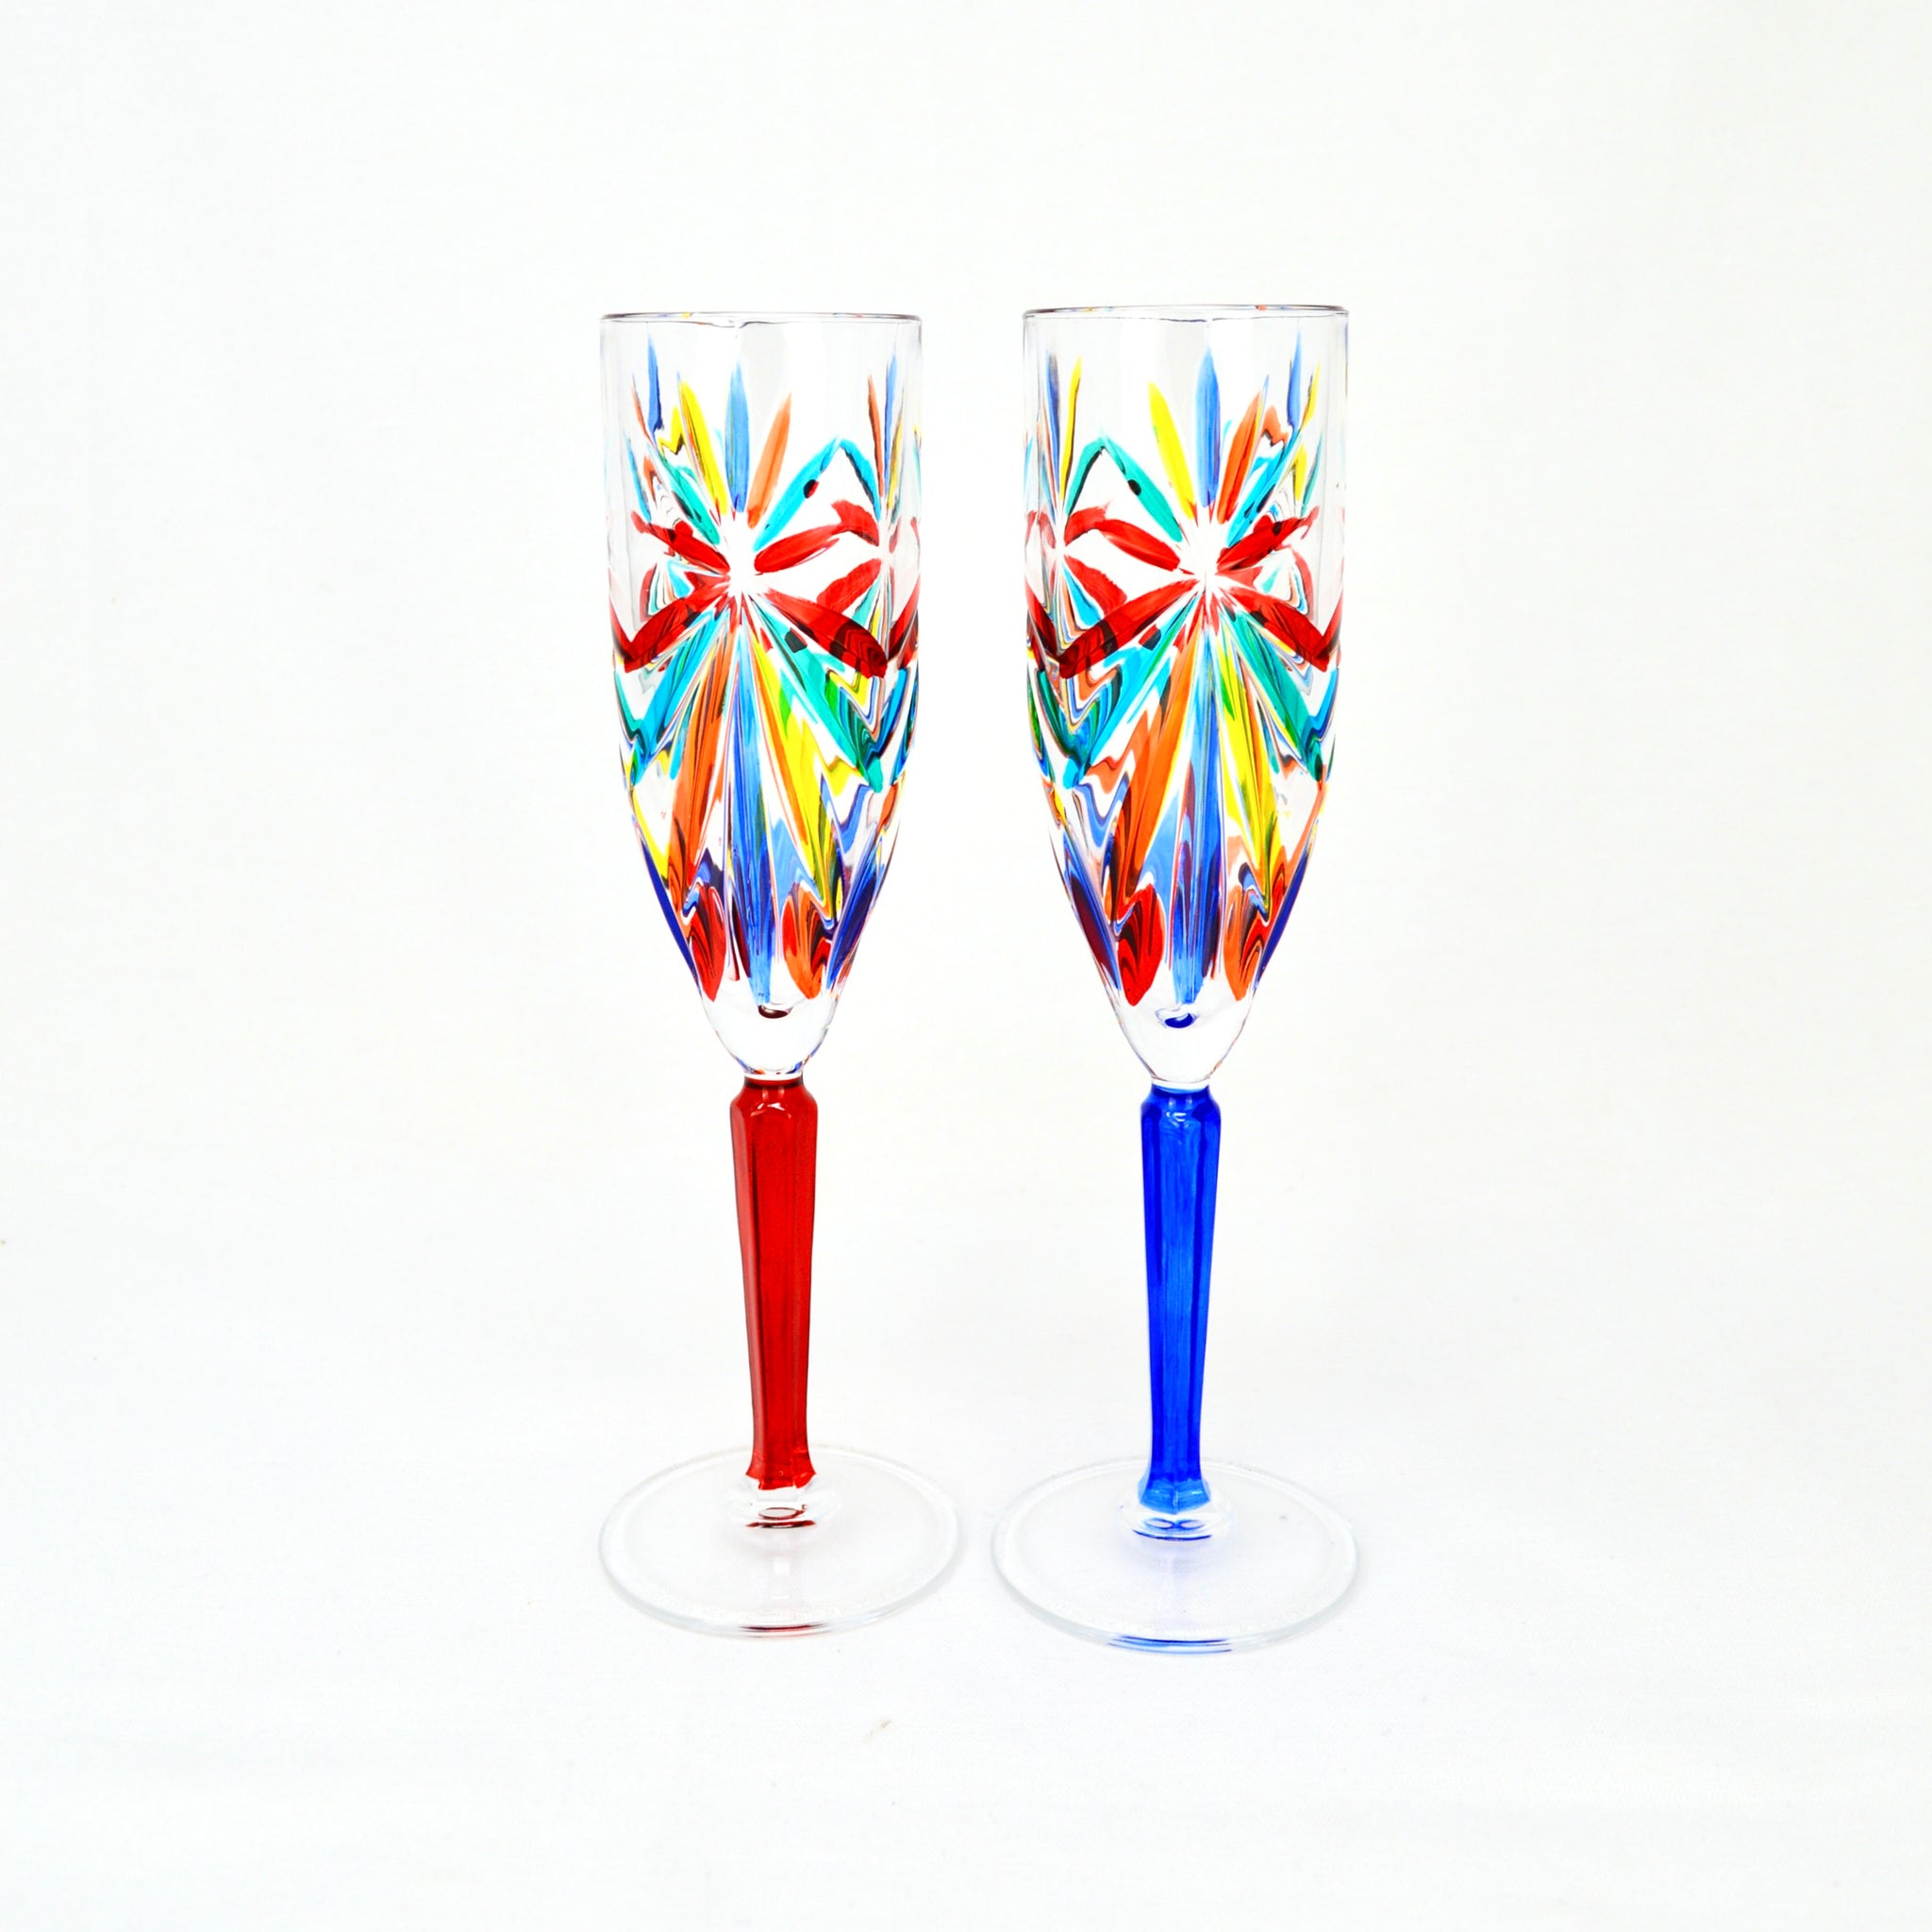 Starburst Champagne Flutes, Set of 2, Made in Italy